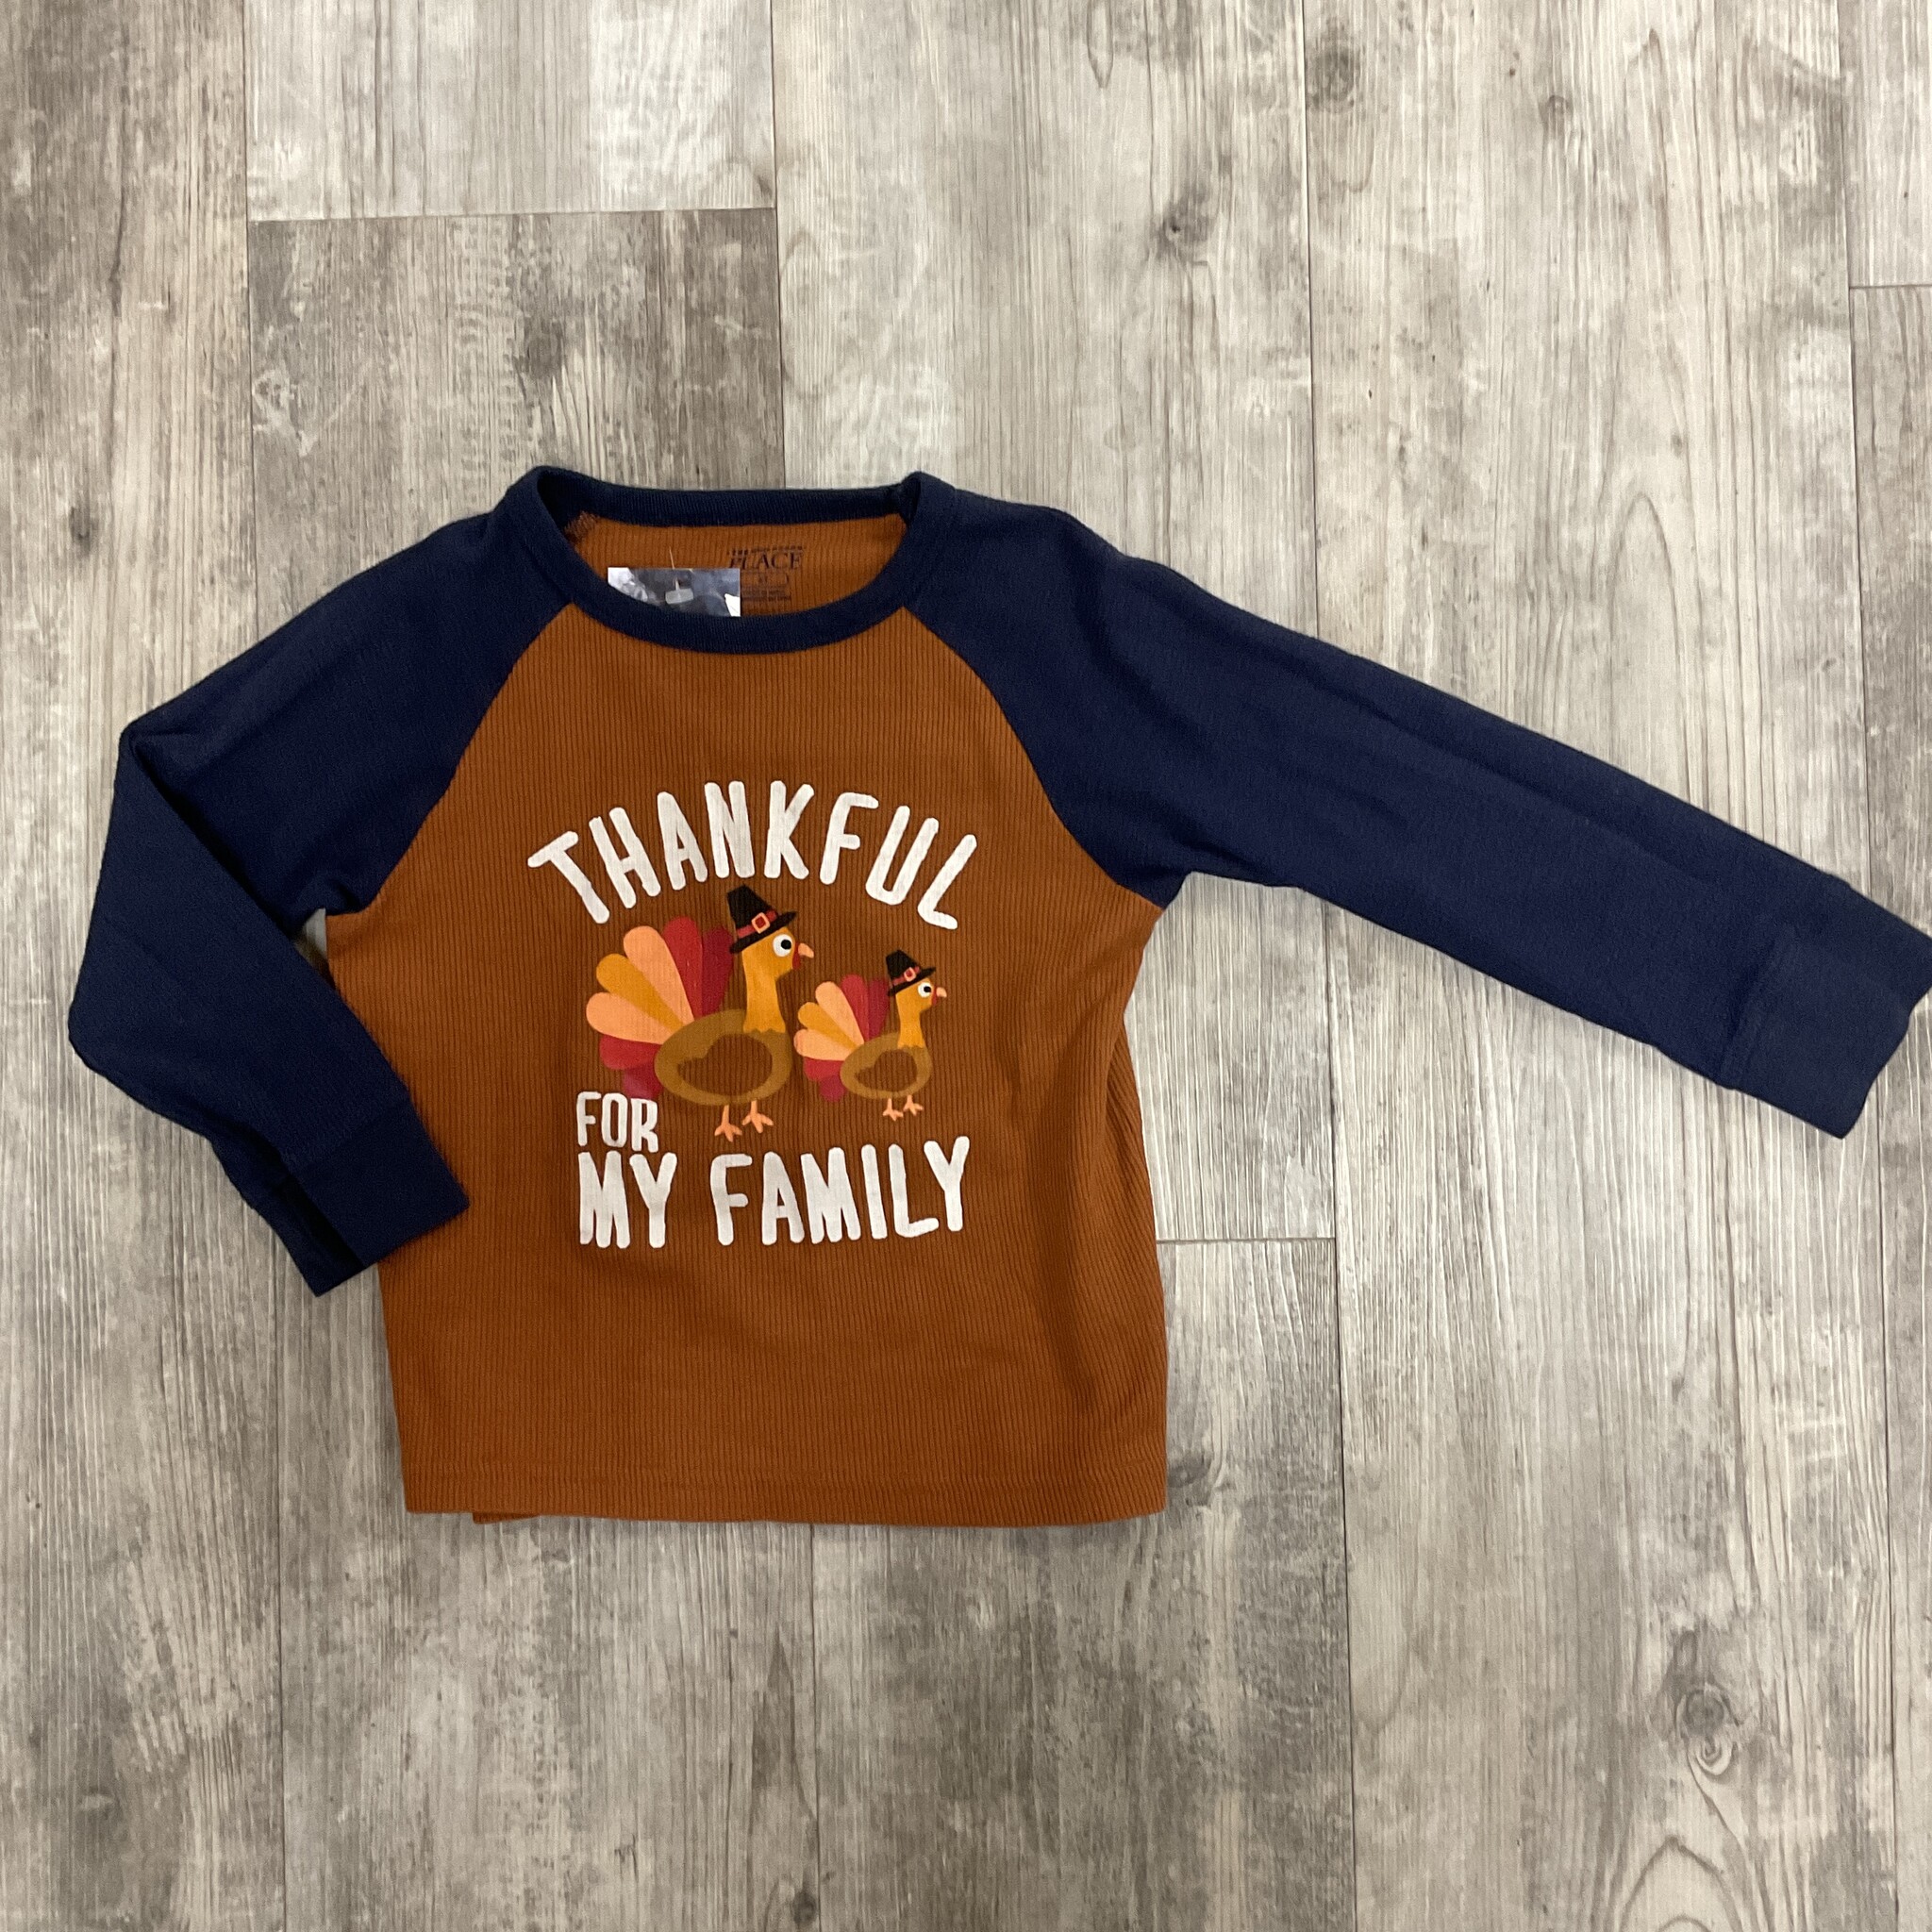 ‘Thankful For My Family’ Waffle Knit Shirt - Size 4